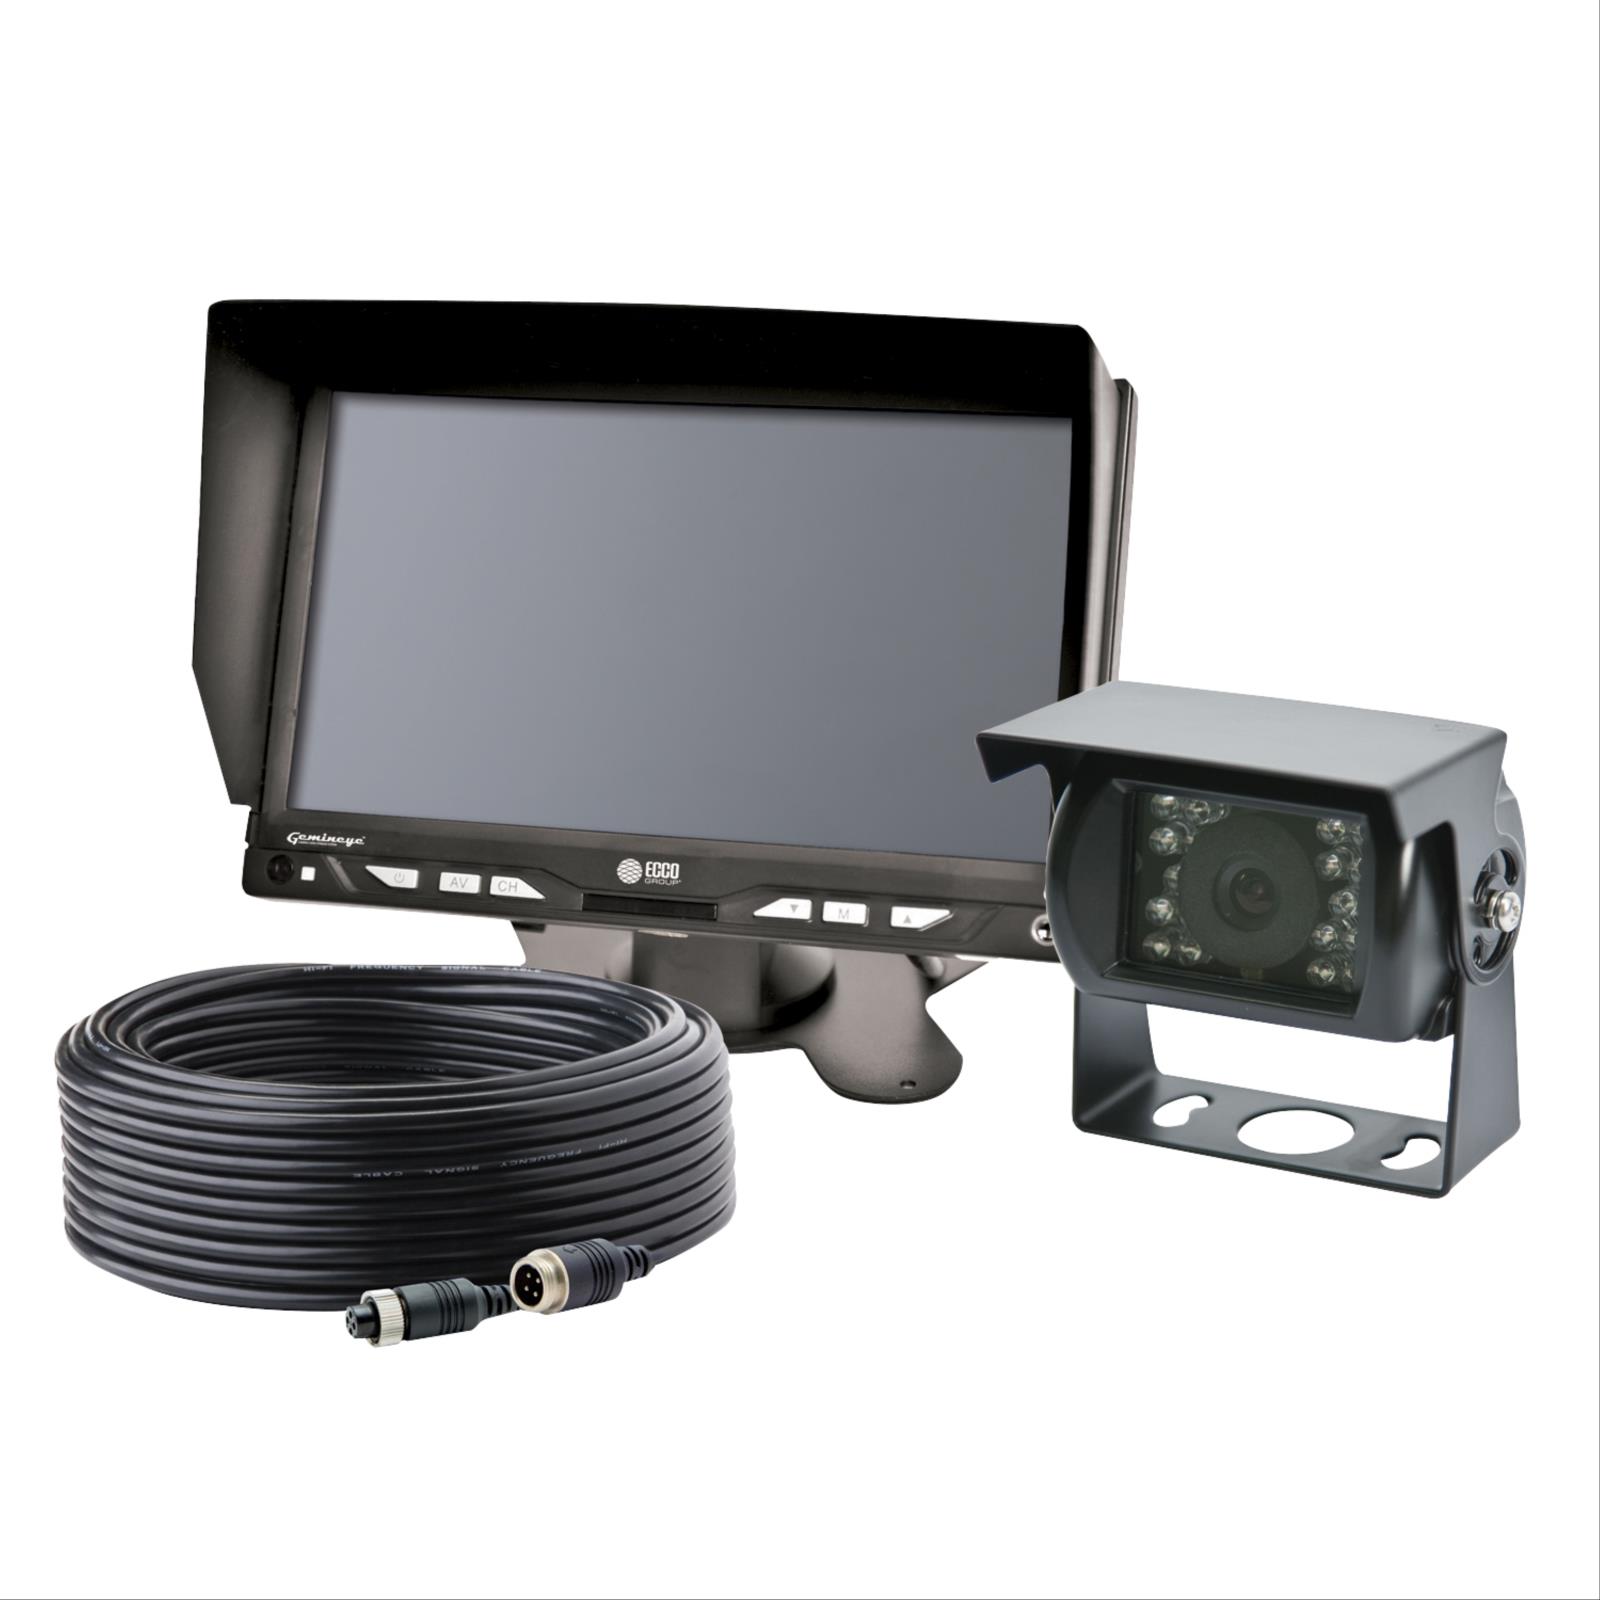 Gemineye™ 7" LCD Color System